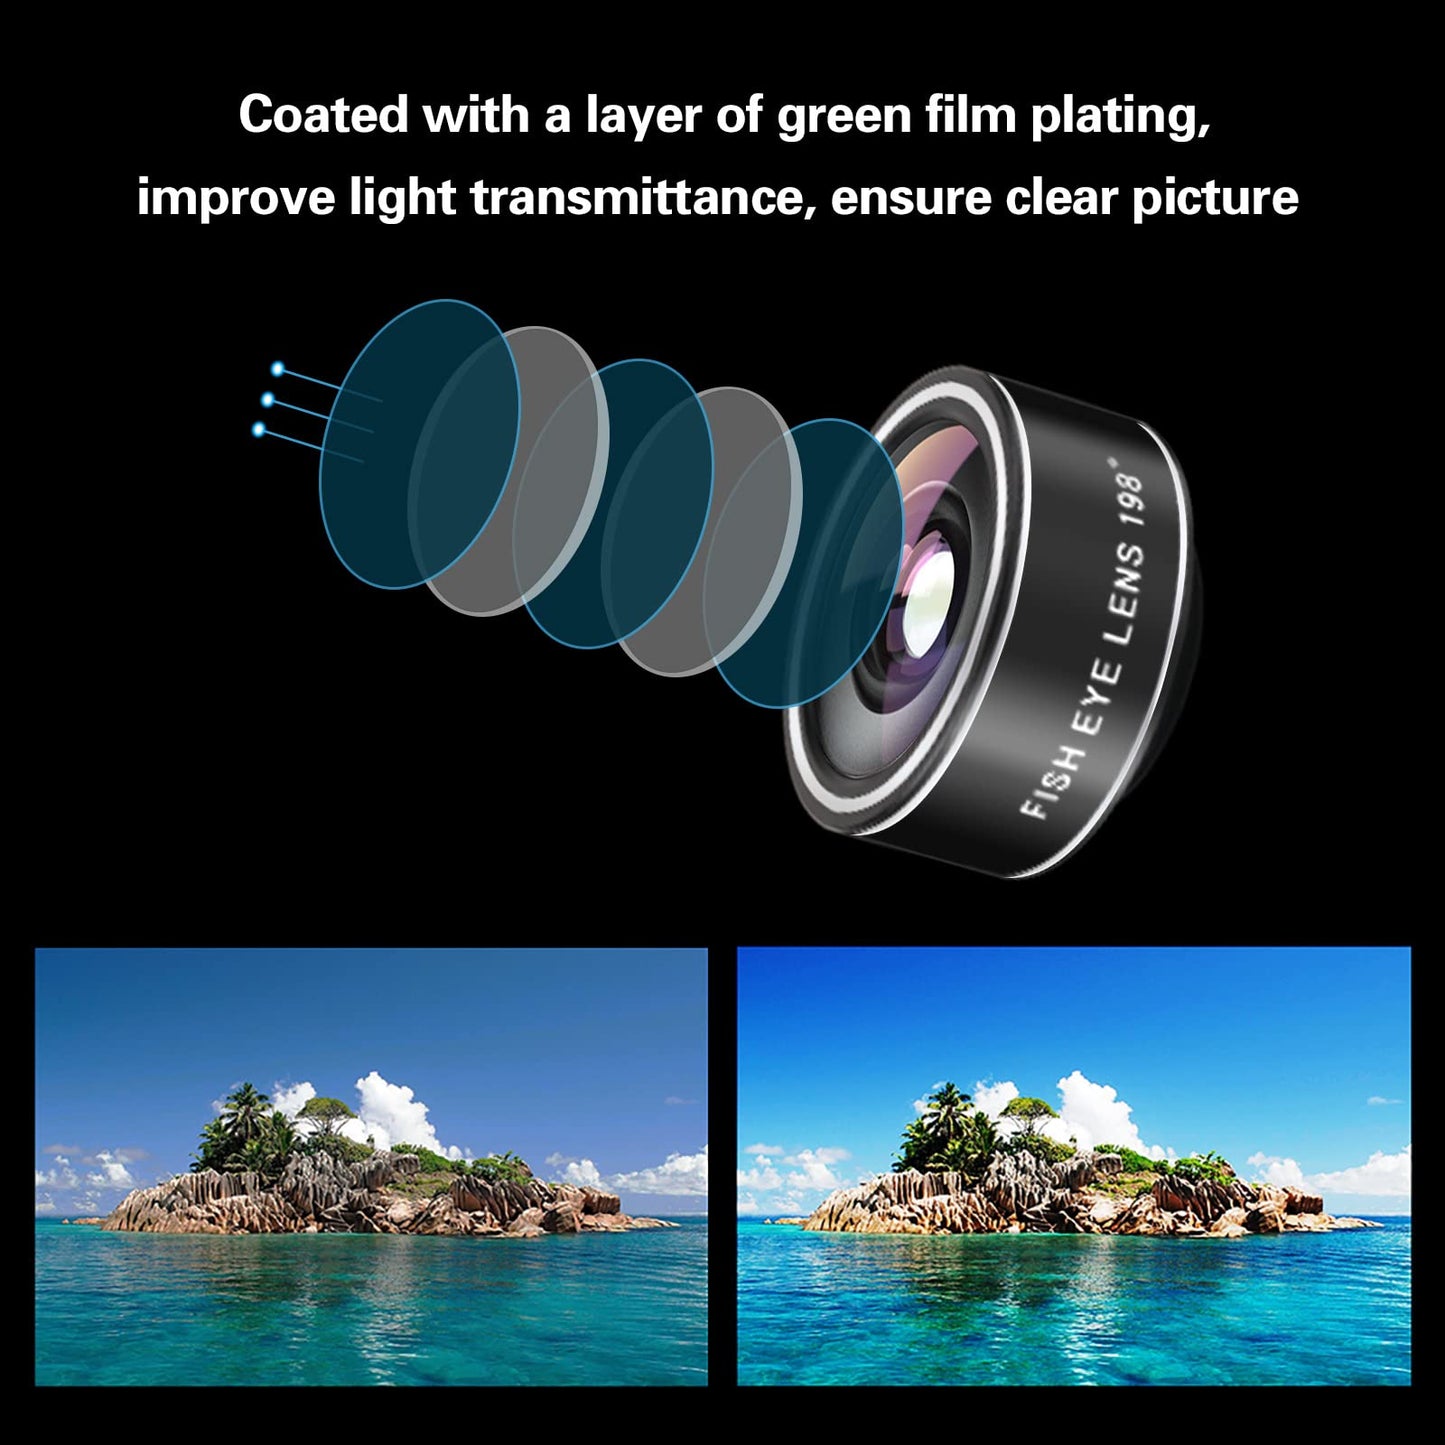 Mocalaca Phone Camera Lens (11 Lenses) Phone Lens Kit, Clip on Fisheye/Macro/Wide Angle Lens Attachment with Travel Case for iPhone 14 13 12 11 Xs X Pro Max Samsung Android Smartphone